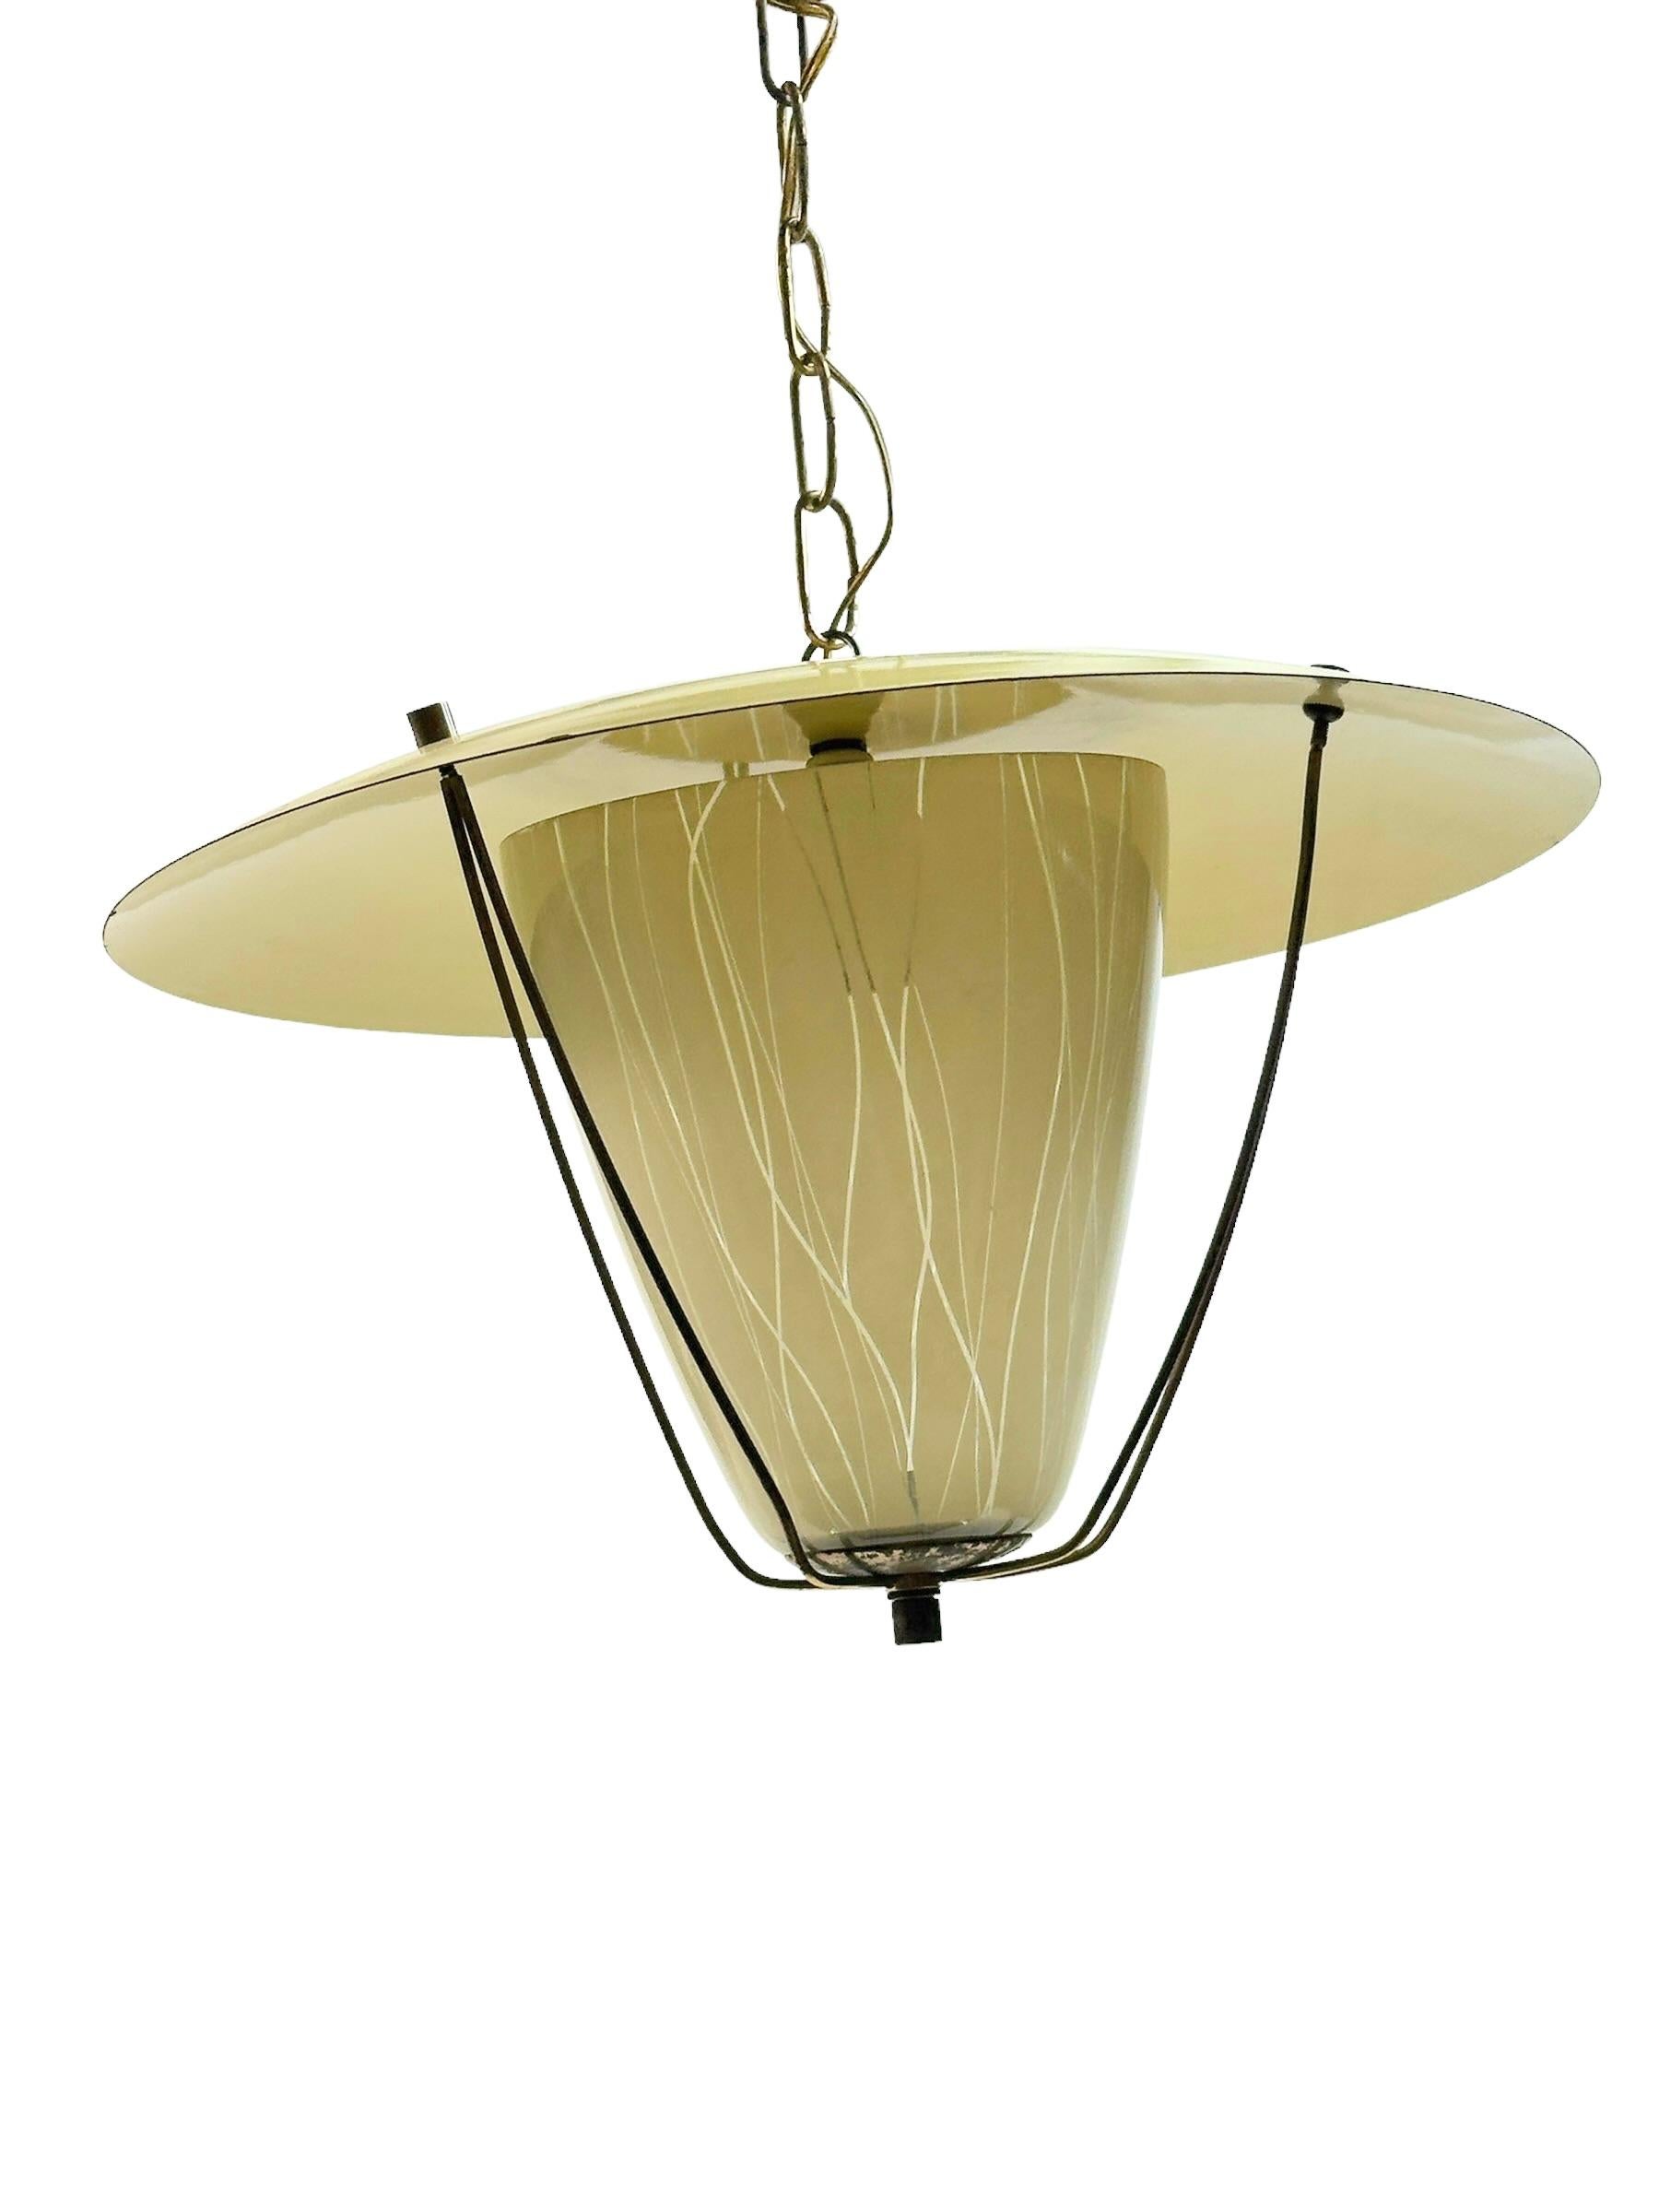 Very decorative and beautiful chandelier lantern pendant made of brass and metal, fitted with an E27/E26 socket. Made in Italy in the 1950s, attributed to the famous well known Stilnovo Manufacturer. The Fixture requires one European E27 / 110 Volt